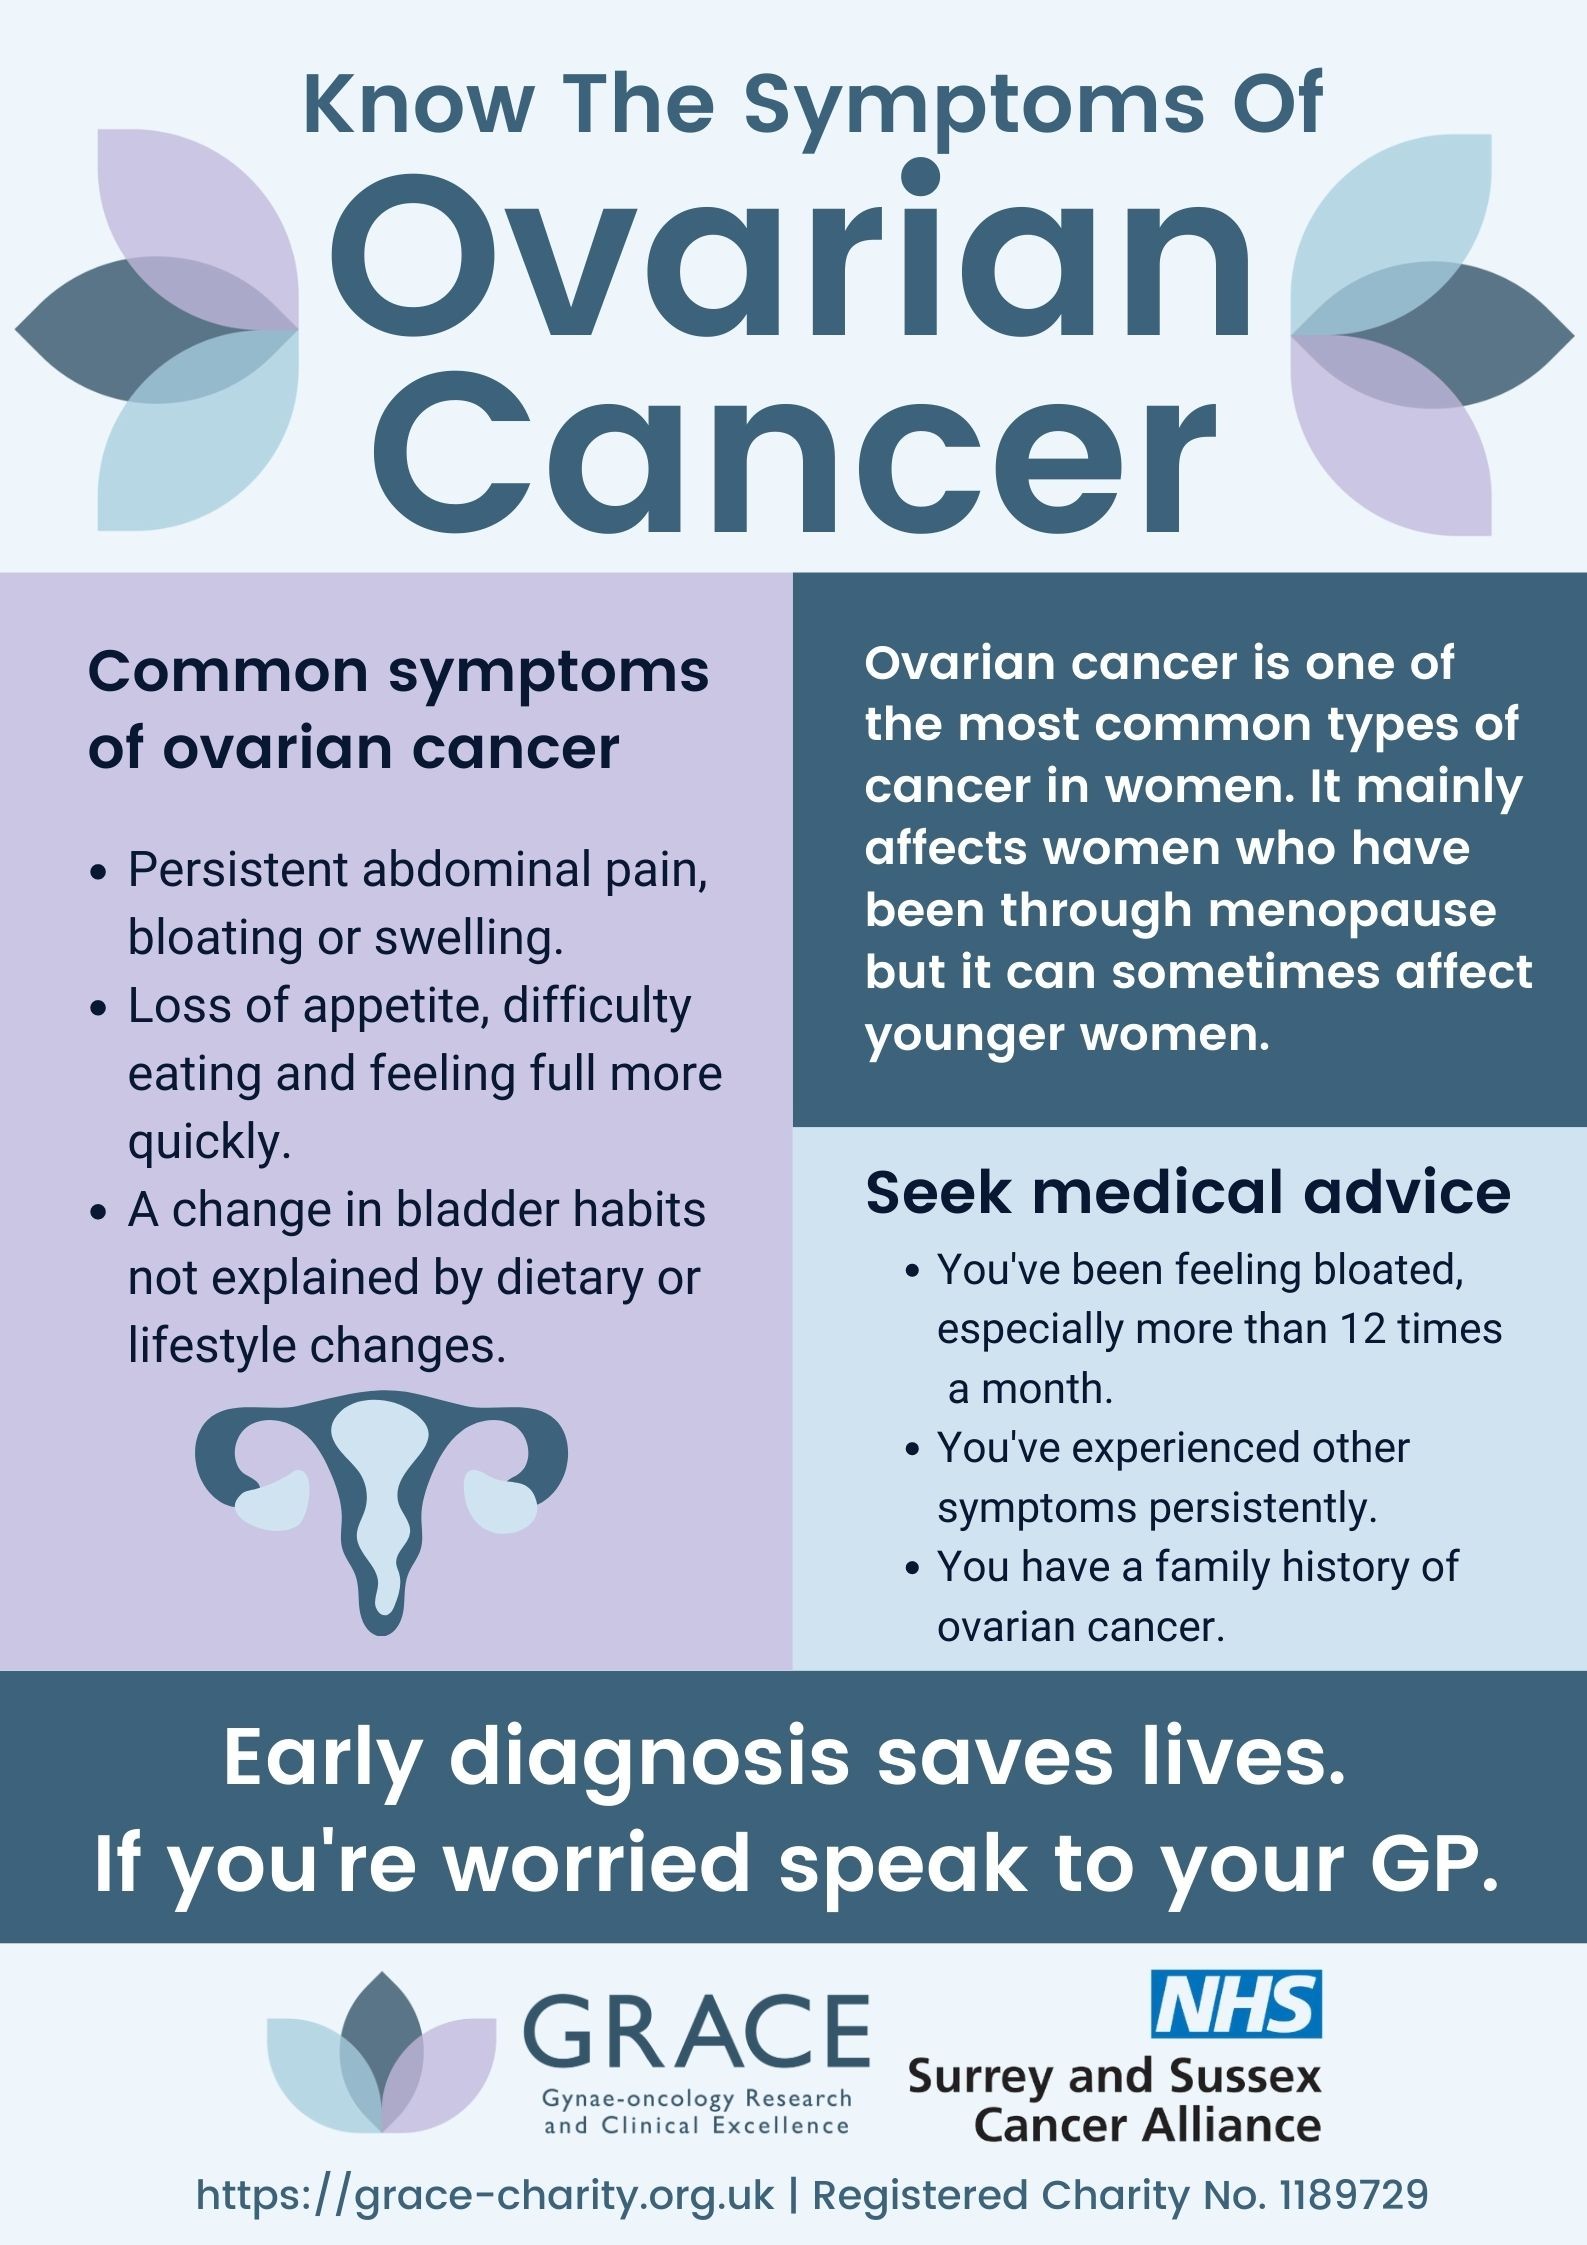 Image shows a poster created by GRACE gynaecology charity explaining the symptoms of ovarian cancerapking